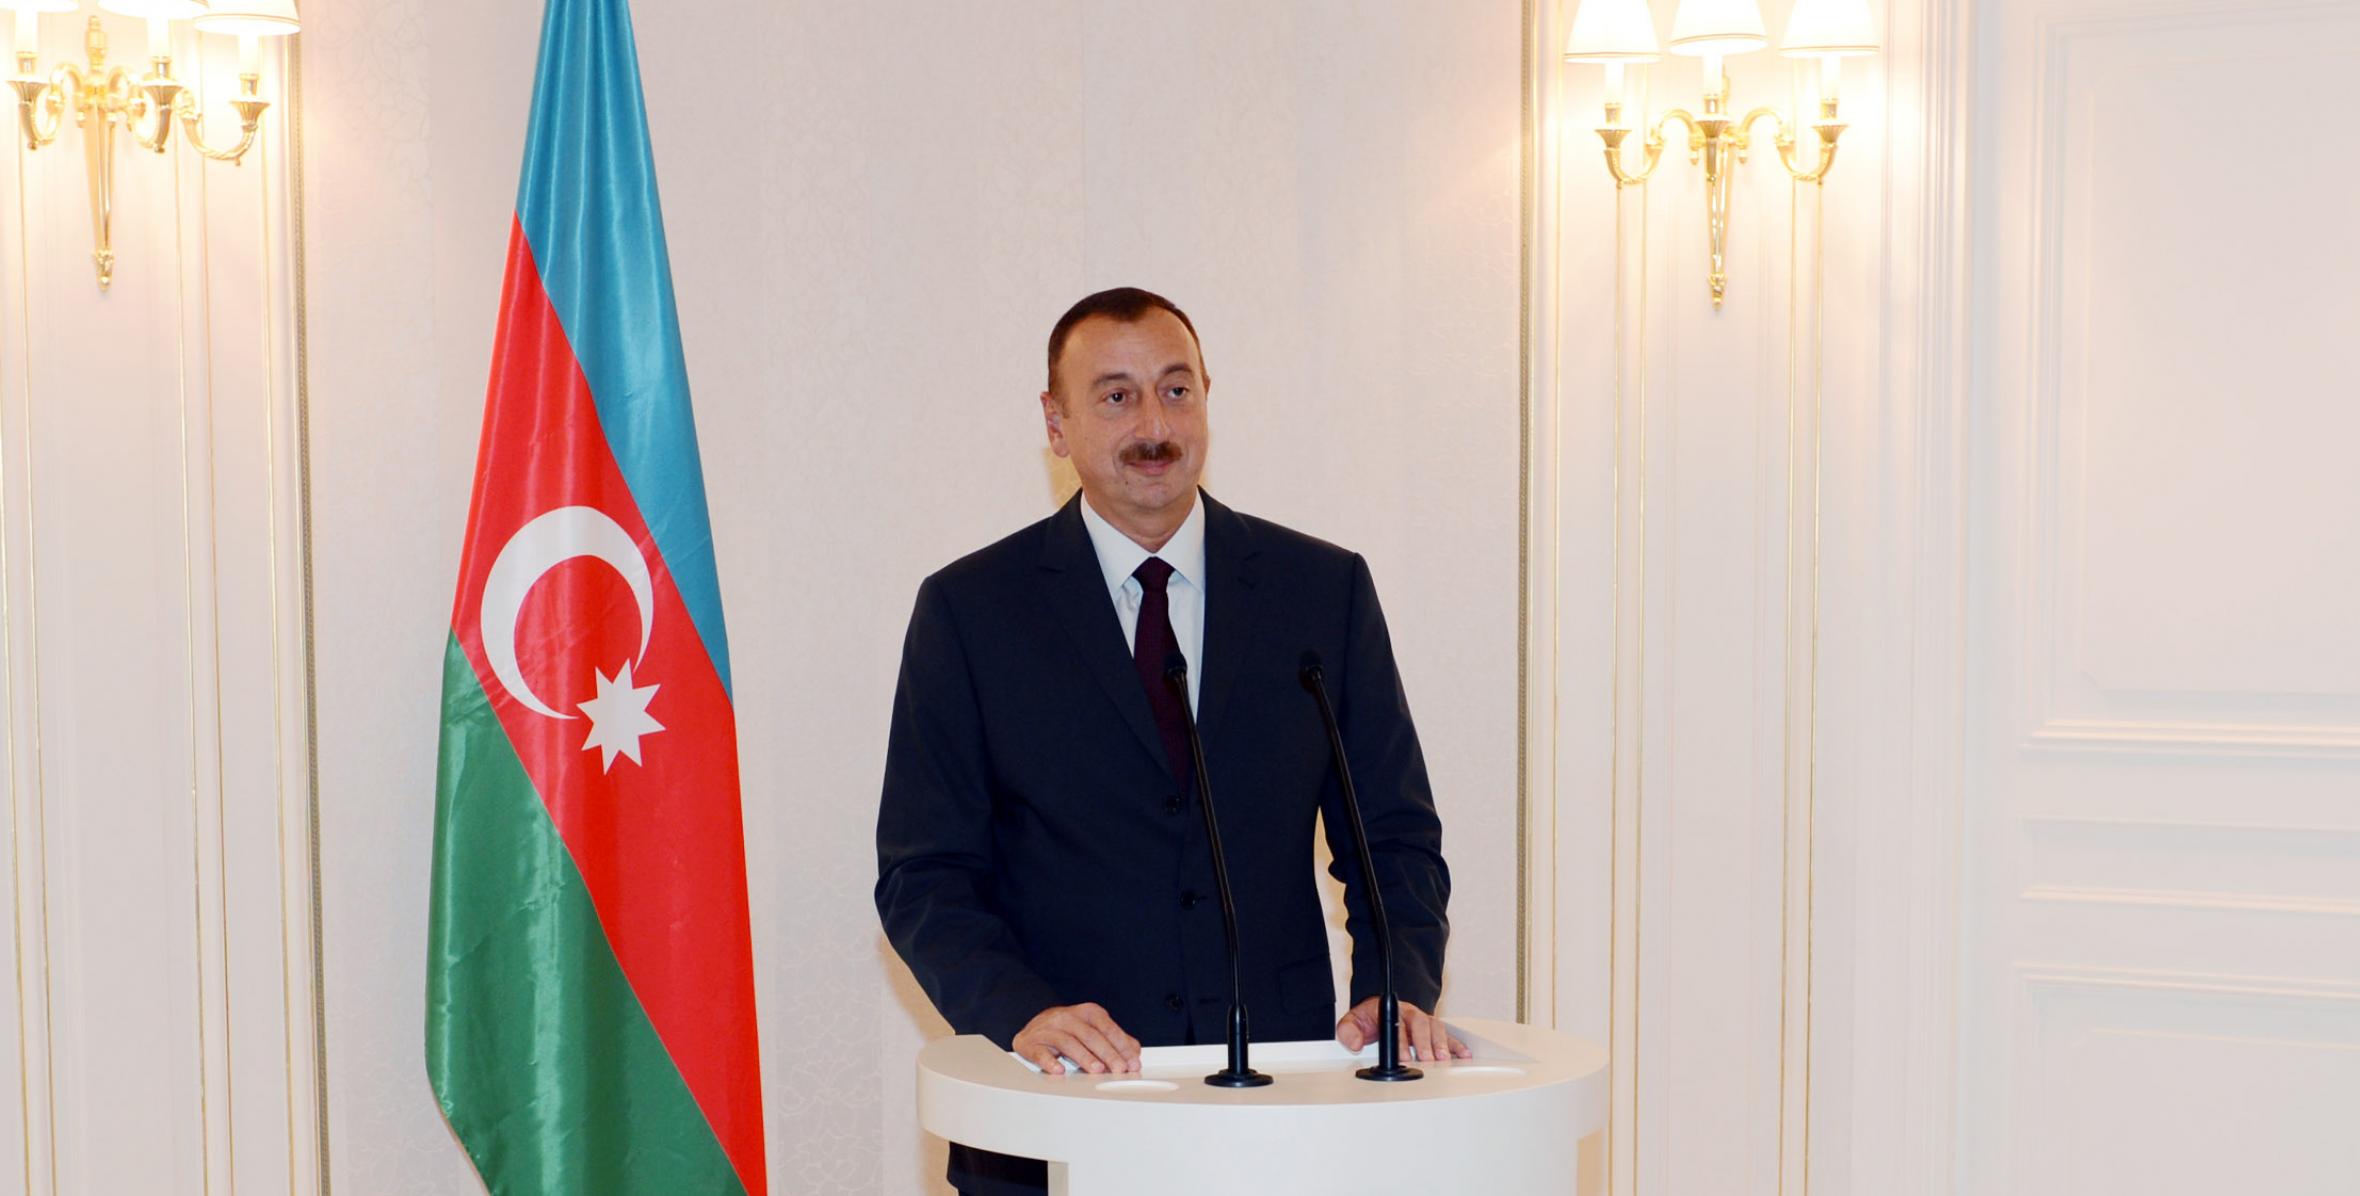 Ilham Aliyev attended the reception dedicated to the opening of the Center of Azerbaijani Culture in Paris